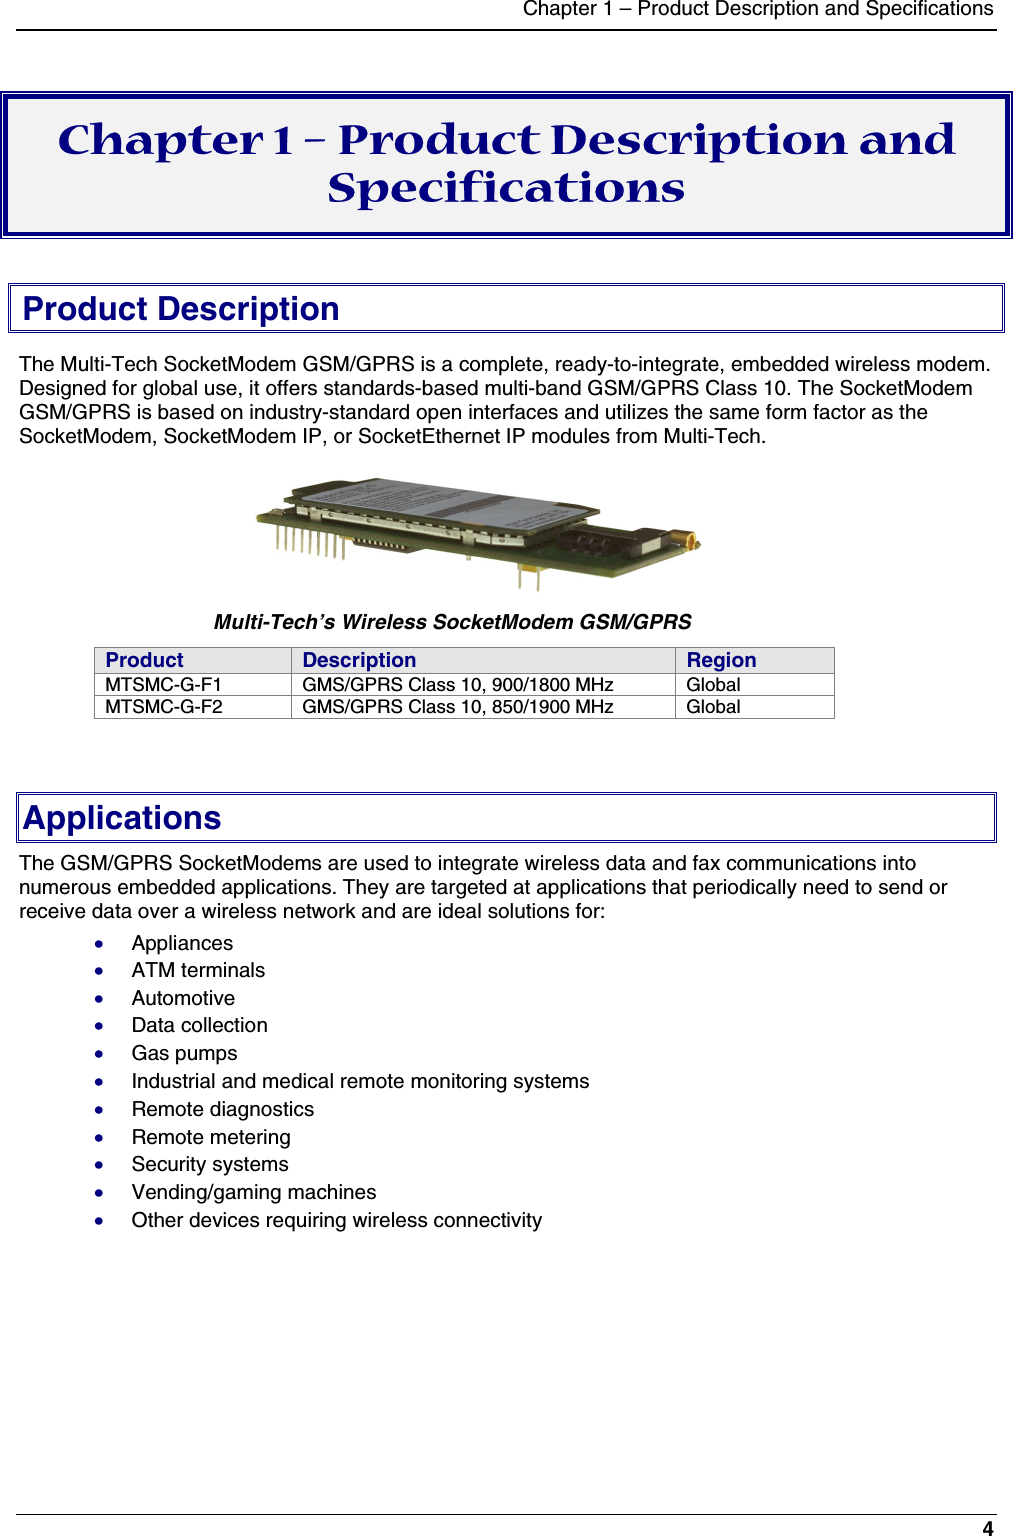 Chapter 1 – Product Description and Specifications4Chapter 1 – Product Description andSpecificationsProduct DescriptionThe Multi-Tech SocketModem GSM/GPRS is a complete, ready-to-integrate, embedded wireless modem.Designed for global use, it offers standards-based multi-band GSM/GPRS Class 10. The SocketModemGSM/GPRS is based on industry-standard open interfaces and utilizes the same form factor as theSocketModem, SocketModem IP, or SocketEthernet IP modules from Multi-Tech.      Multi-Tech’s Wireless SocketModem GSM/GPRSProduct Description RegionMTSMC-G-F1 GMS/GPRS Class 10, 900/1800 MHz GlobalMTSMC-G-F2 GMS/GPRS Class 10, 850/1900 MHz GlobalApplicationsThe GSM/GPRS SocketModems are used to integrate wireless data and fax communications intonumerous embedded applications. They are targeted at applications that periodically need to send orreceive data over a wireless network and are ideal solutions for:· Appliances· ATM terminals· Automotive· Data collection· Gas pumps· Industrial and medical remote monitoring systems· Remote diagnostics· Remote metering· Security systems· Vending/gaming machines· Other devices requiring wireless connectivity